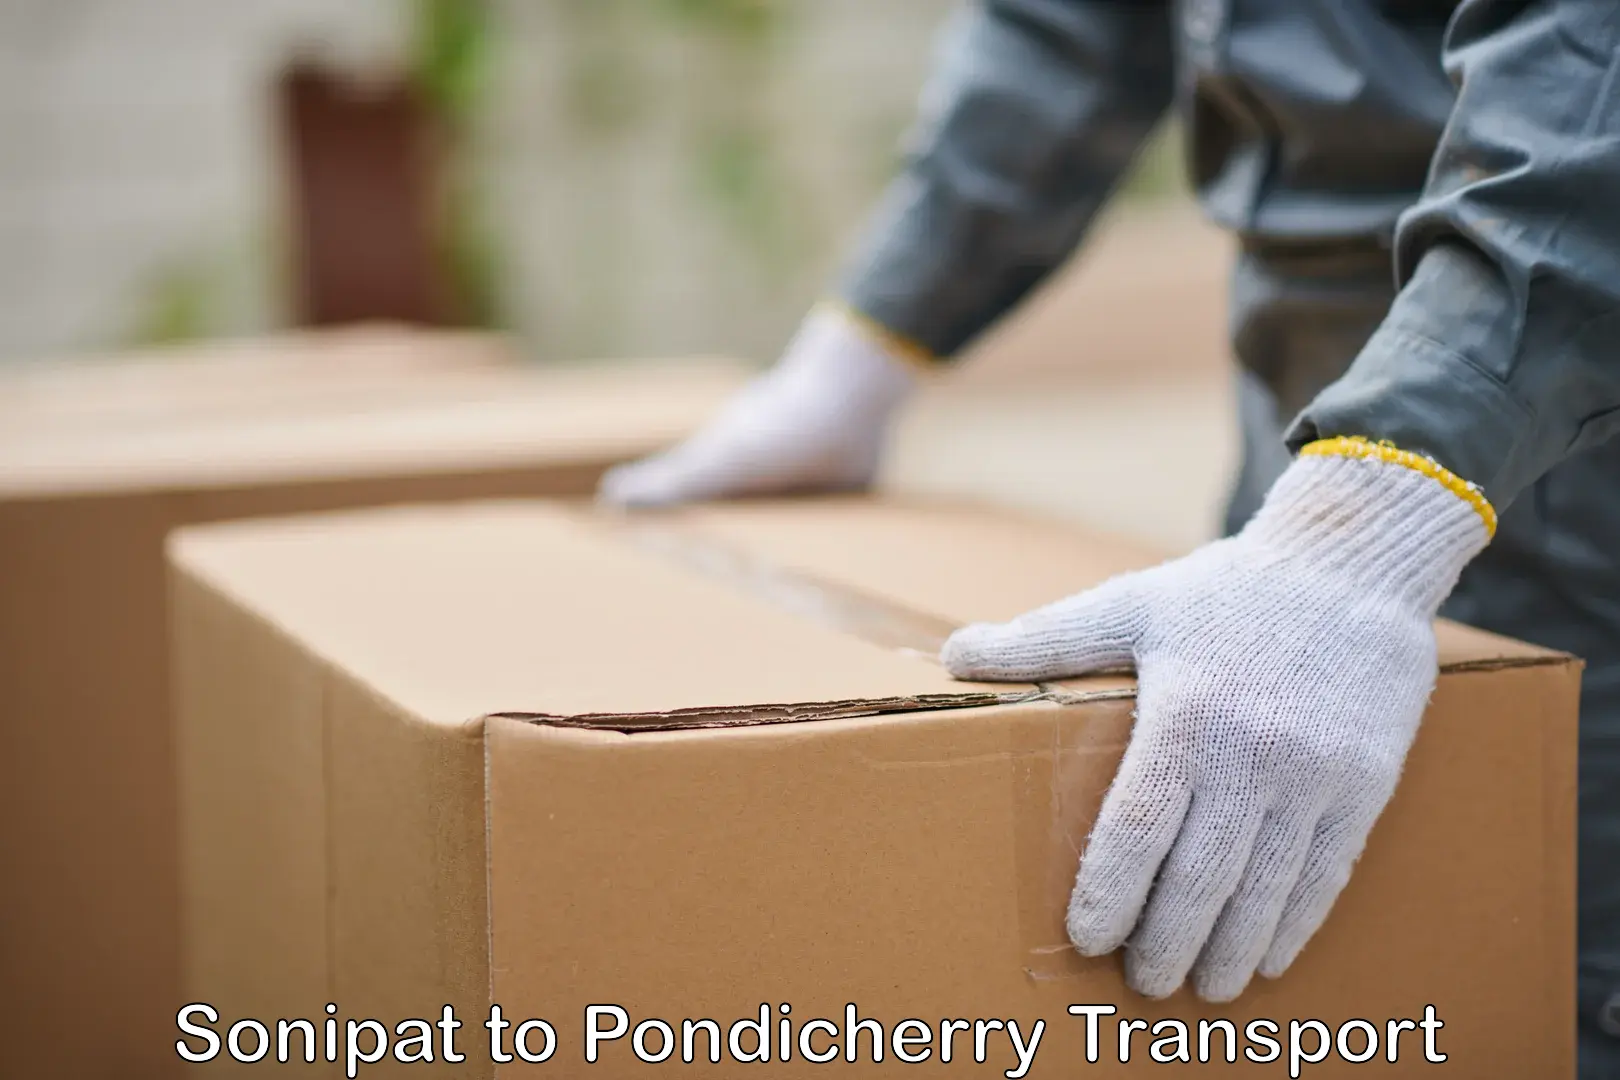 Commercial transport service Sonipat to Pondicherry